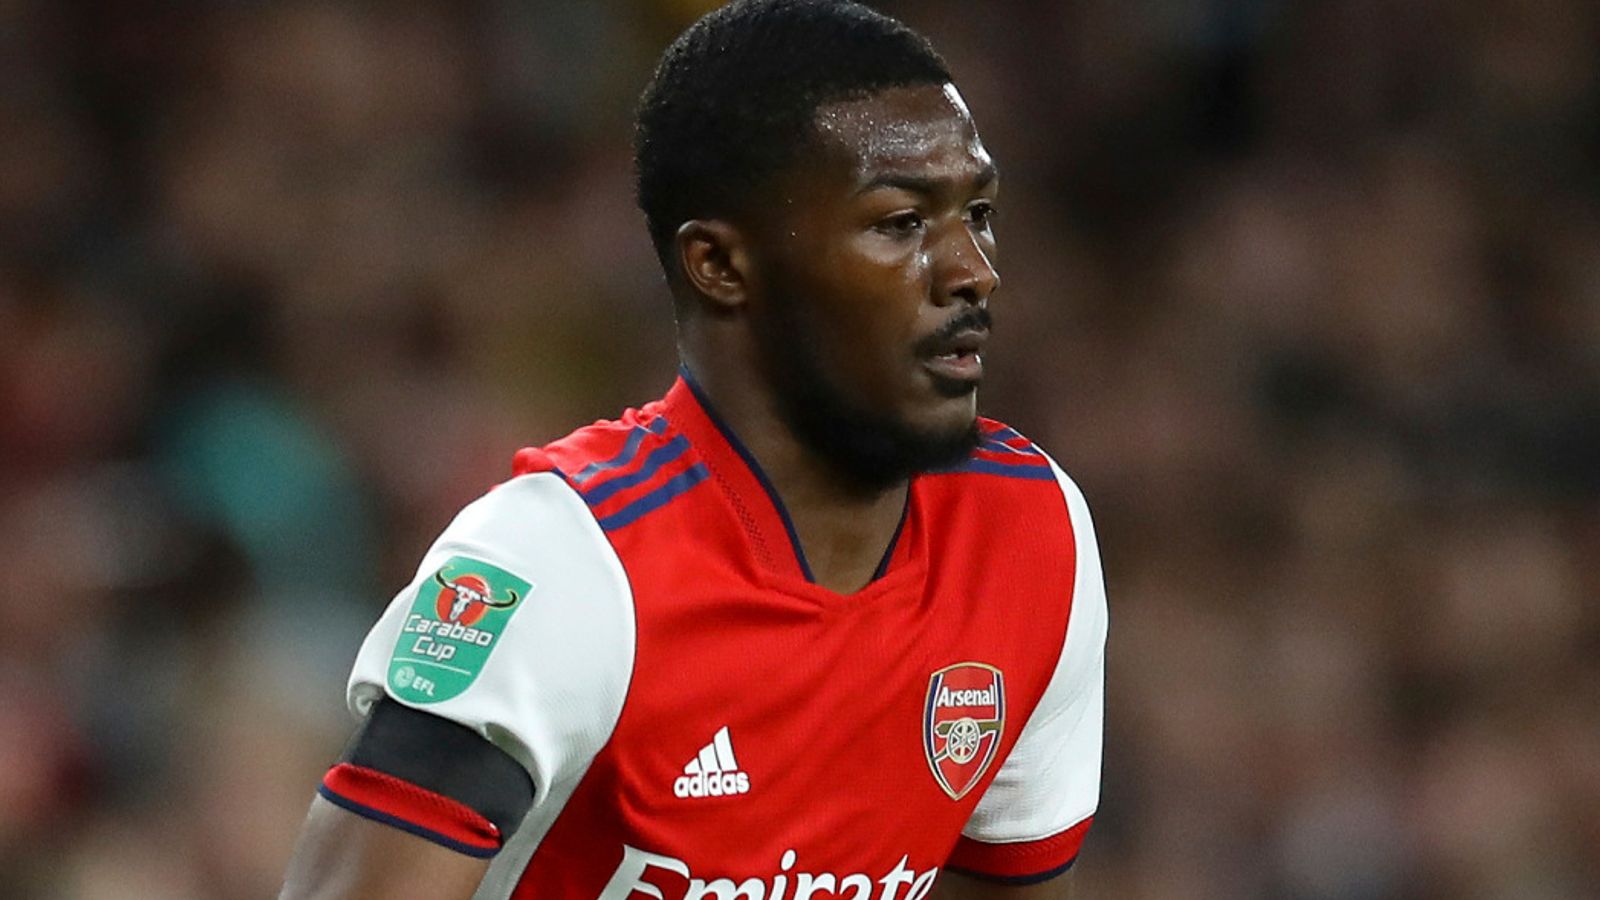 Arsenal transfer news: Ainsley Maitland-Niles close to joining Roma on loan for rest of the season